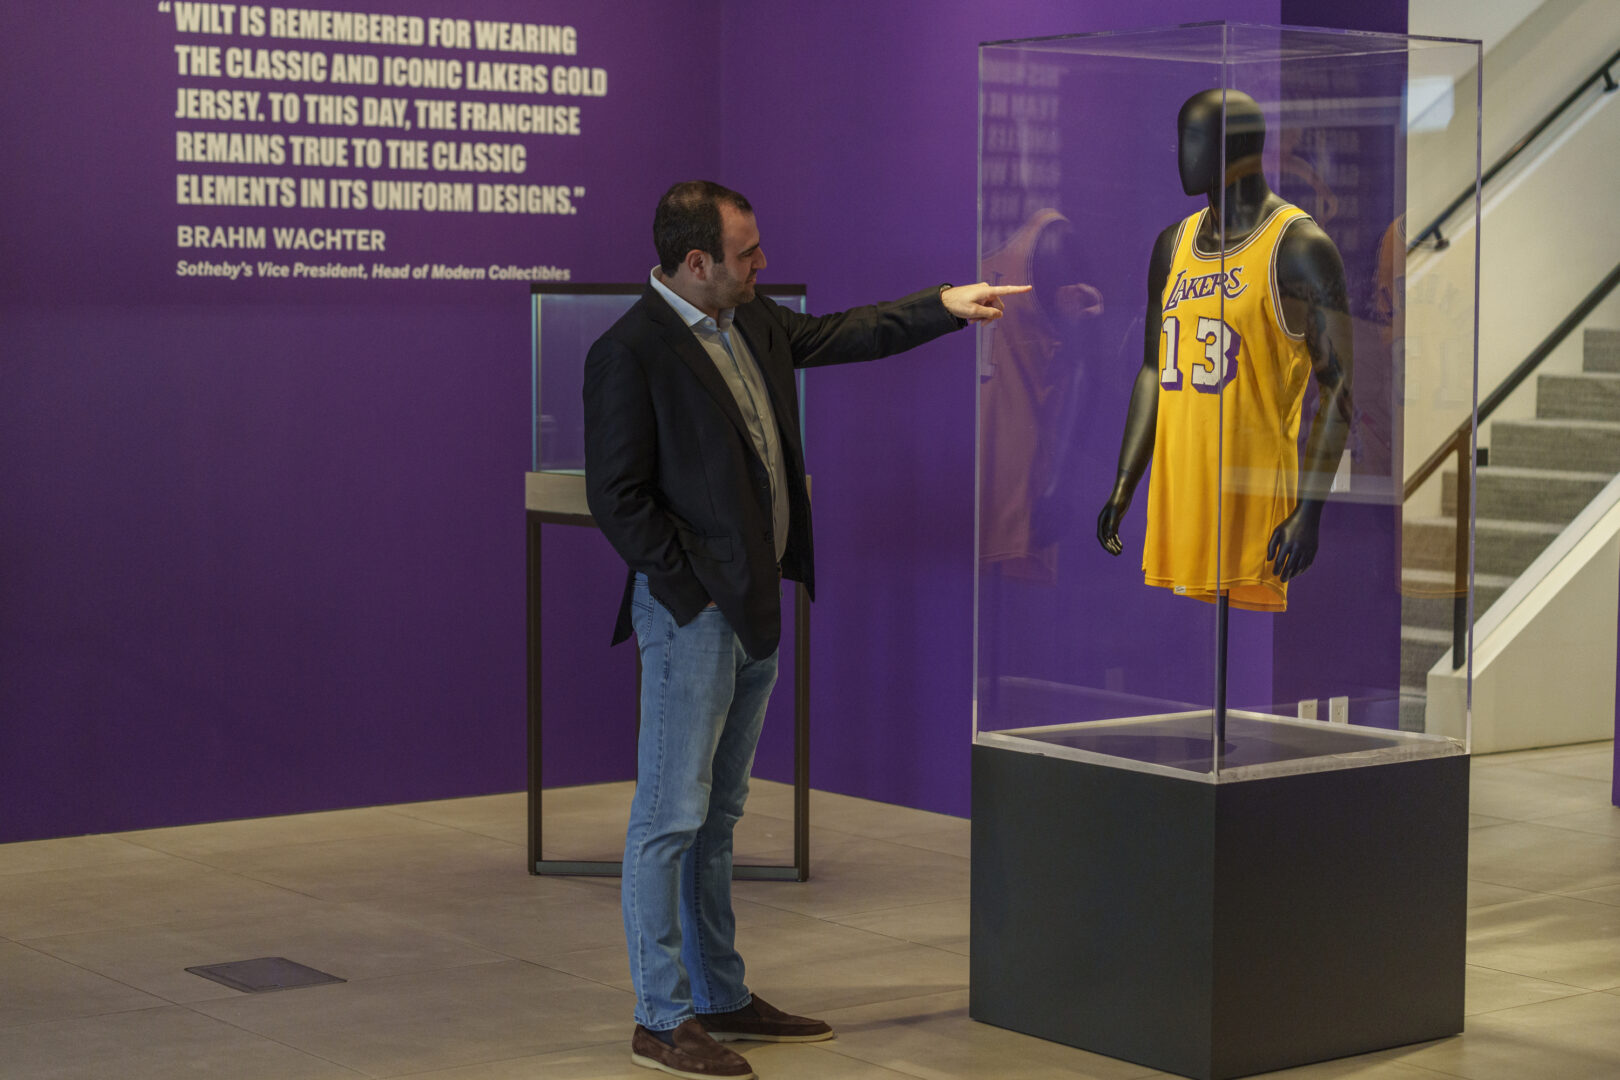 Sotheby's Vice President Brahm Wachter looks at the display of Wilt Chamberlain's 1972 NBA Finals 'Championship Clinching' Jersey at Sotheby's Los Angeles Gallery on Tuesday, Aug. 1, 2023, in Beverly Hills, Calif. The jersey is being offered along with a collection of memorabilia in an online sale Aug. 28-Sept. 27.  